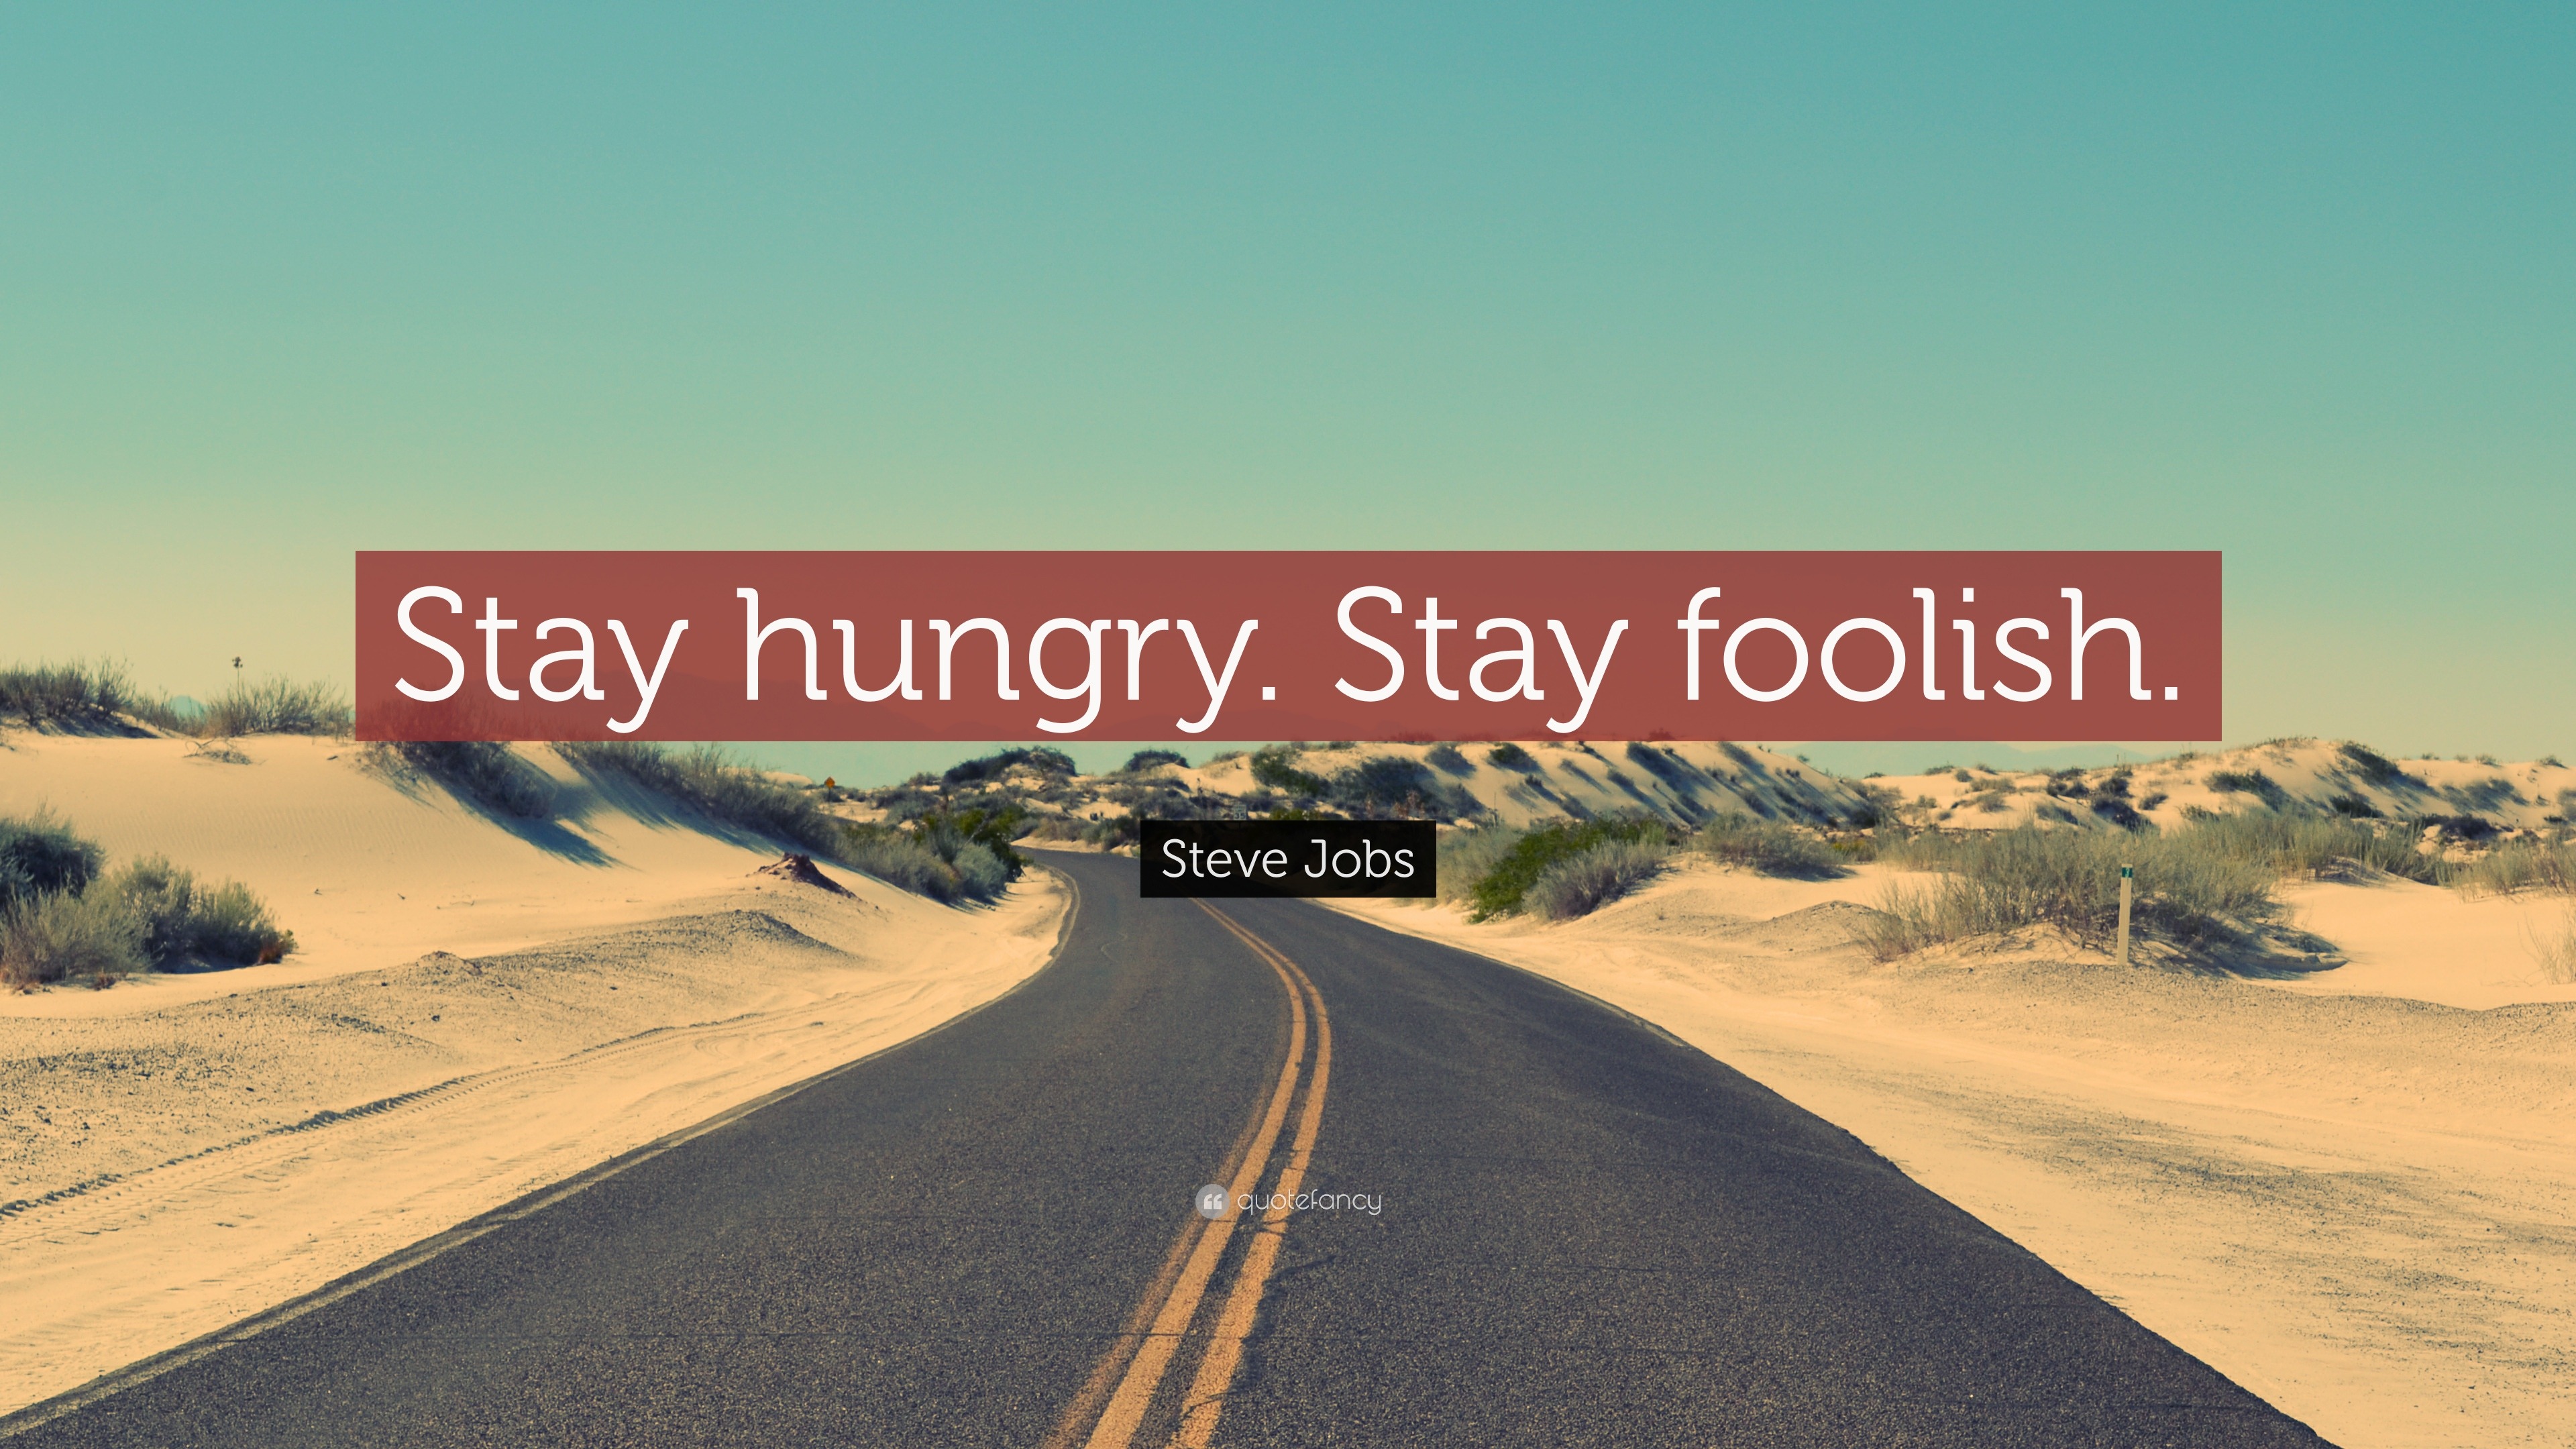 Steve Jobs Quote: “Stay hungry. Stay foolish.” (41 wallpapers) - Quotefancy